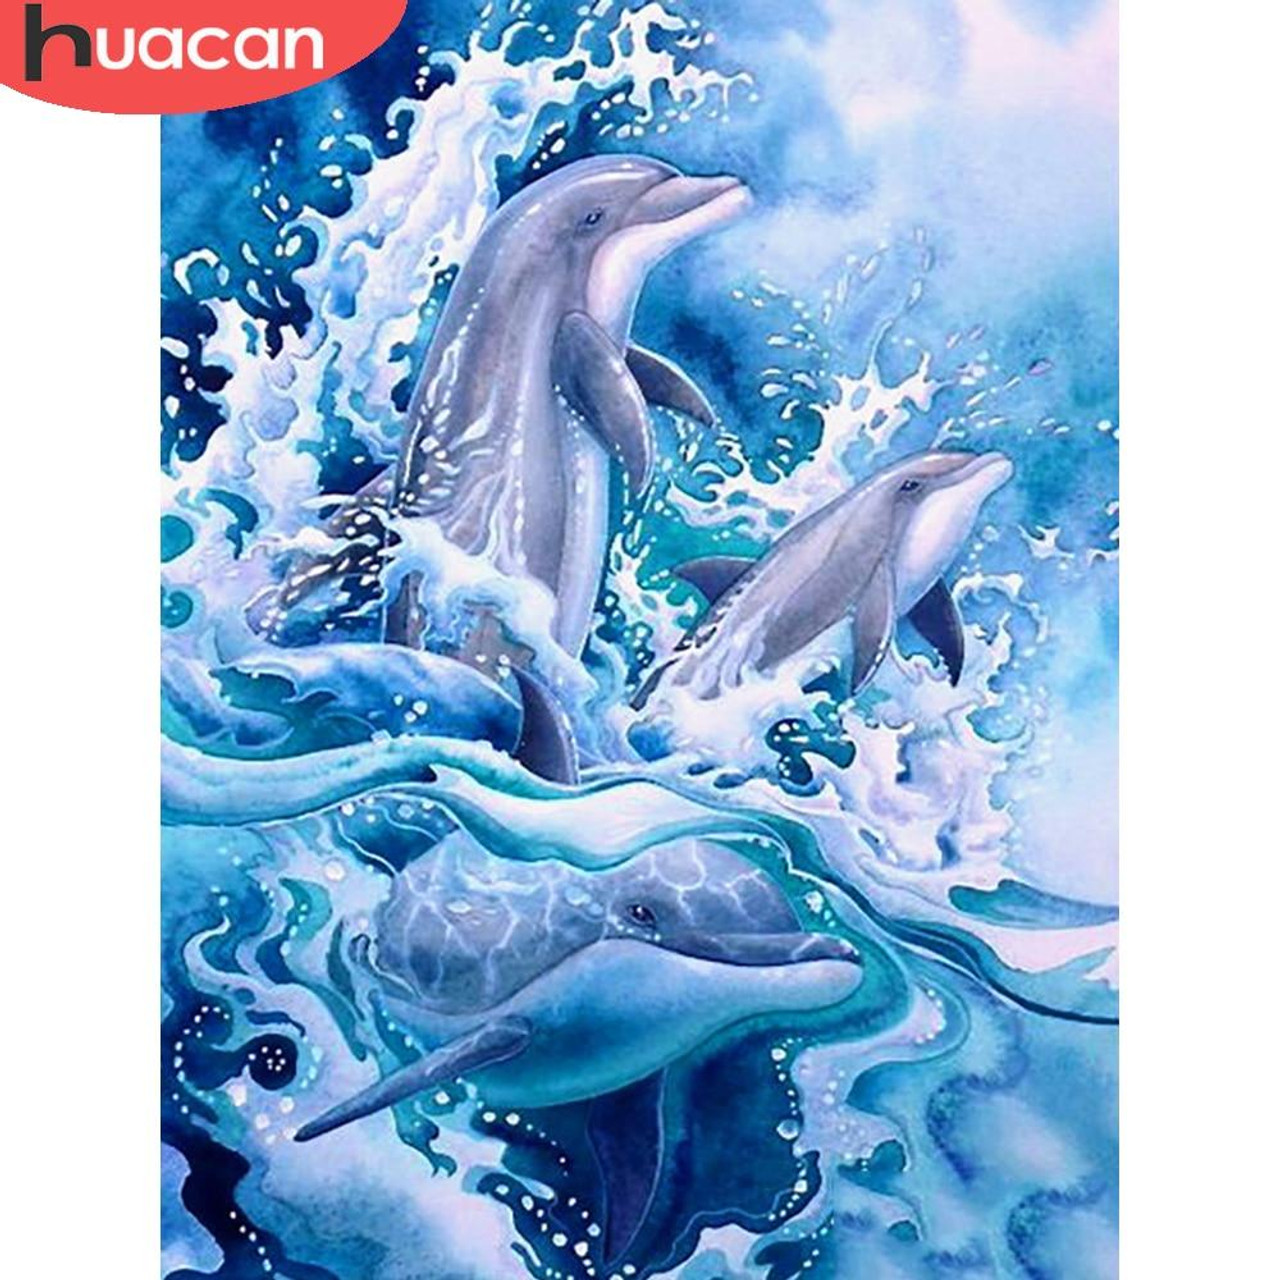 Huacan Living Room Decoration Fish Diamond Painting Kit Picture